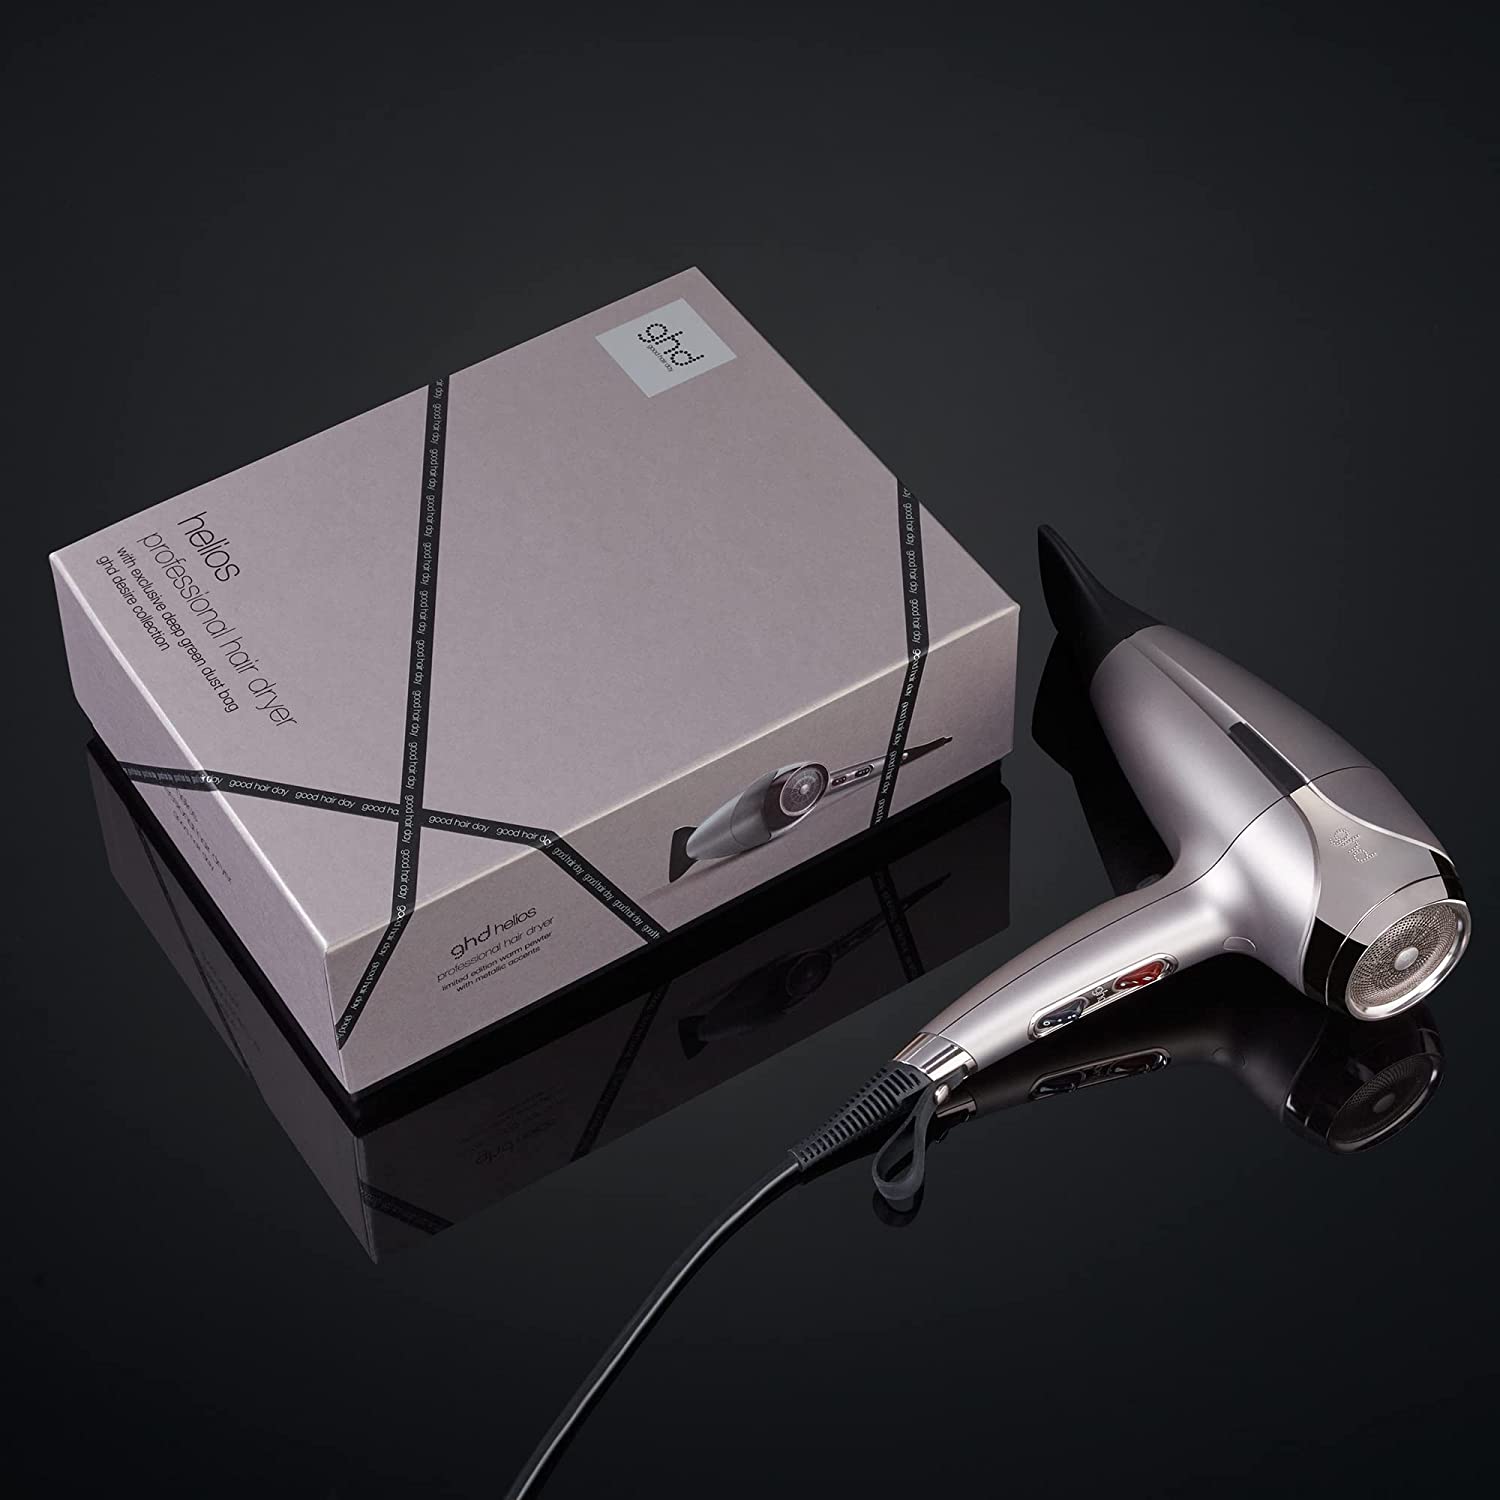 Ghd Helios Professional Hairdryer Gift Set - Warm Pewter